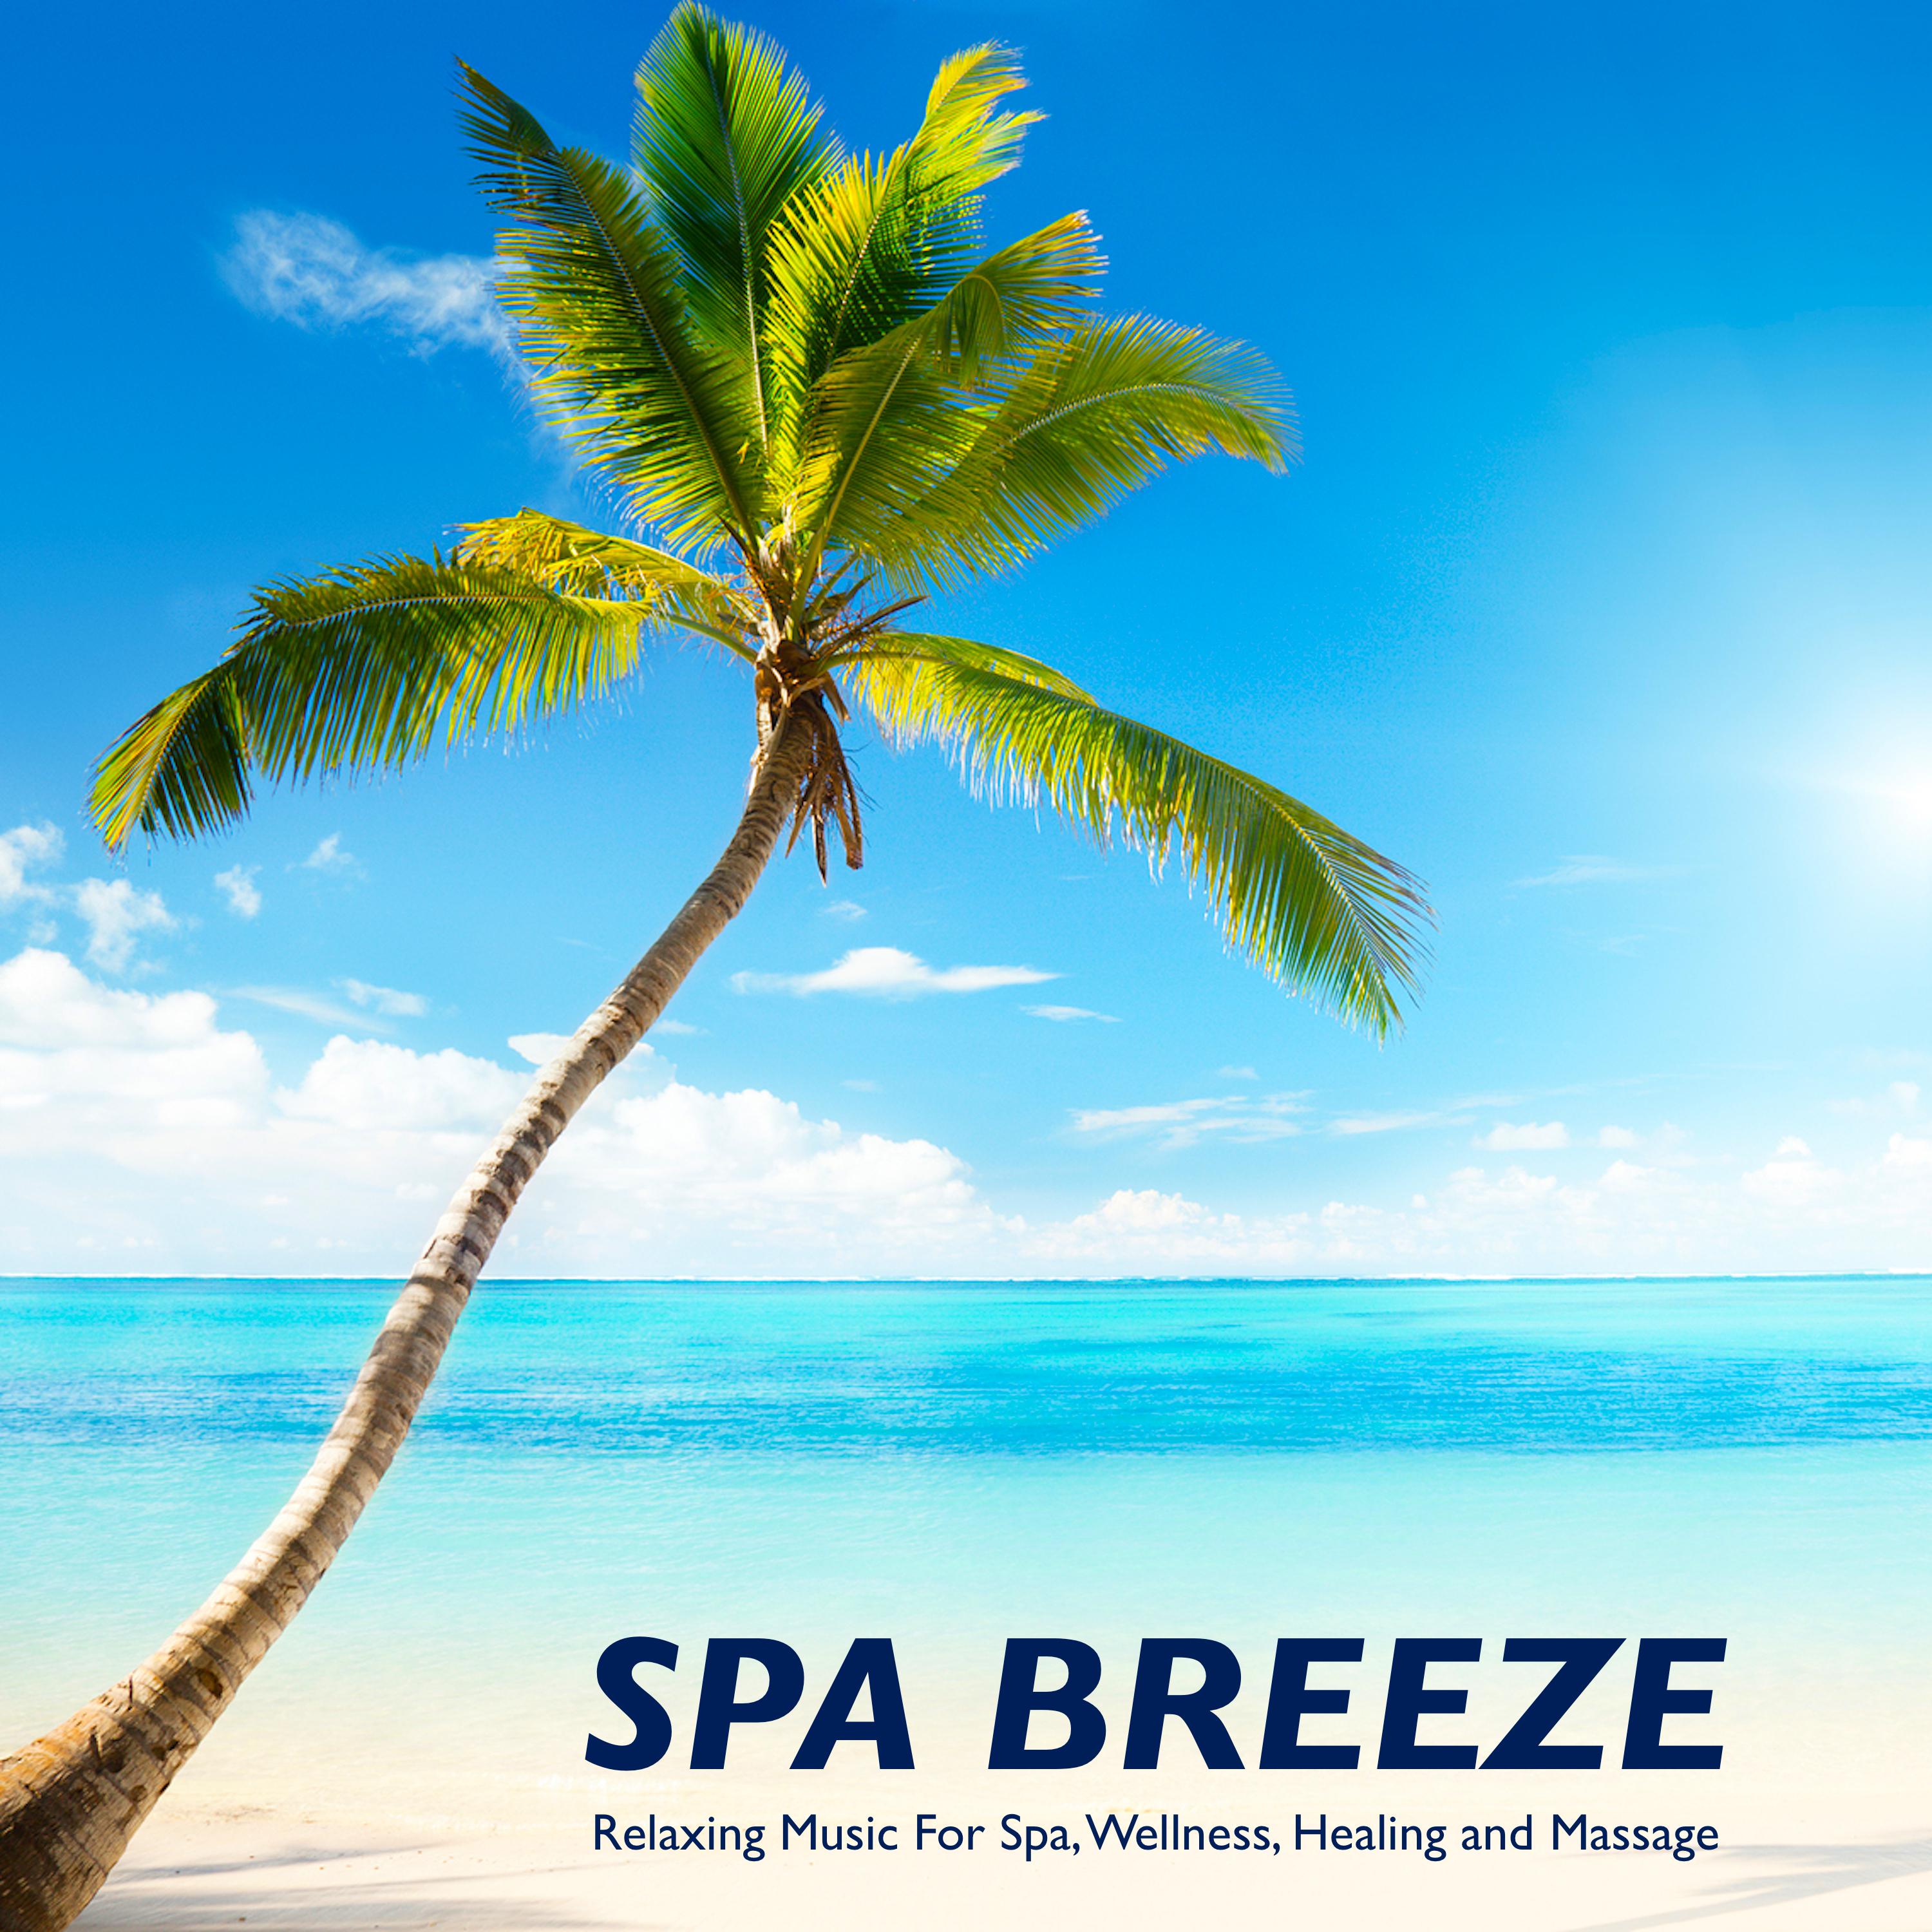 Spa Breeze: Relaxing Music For Spa, Wellness, Healing and Massage